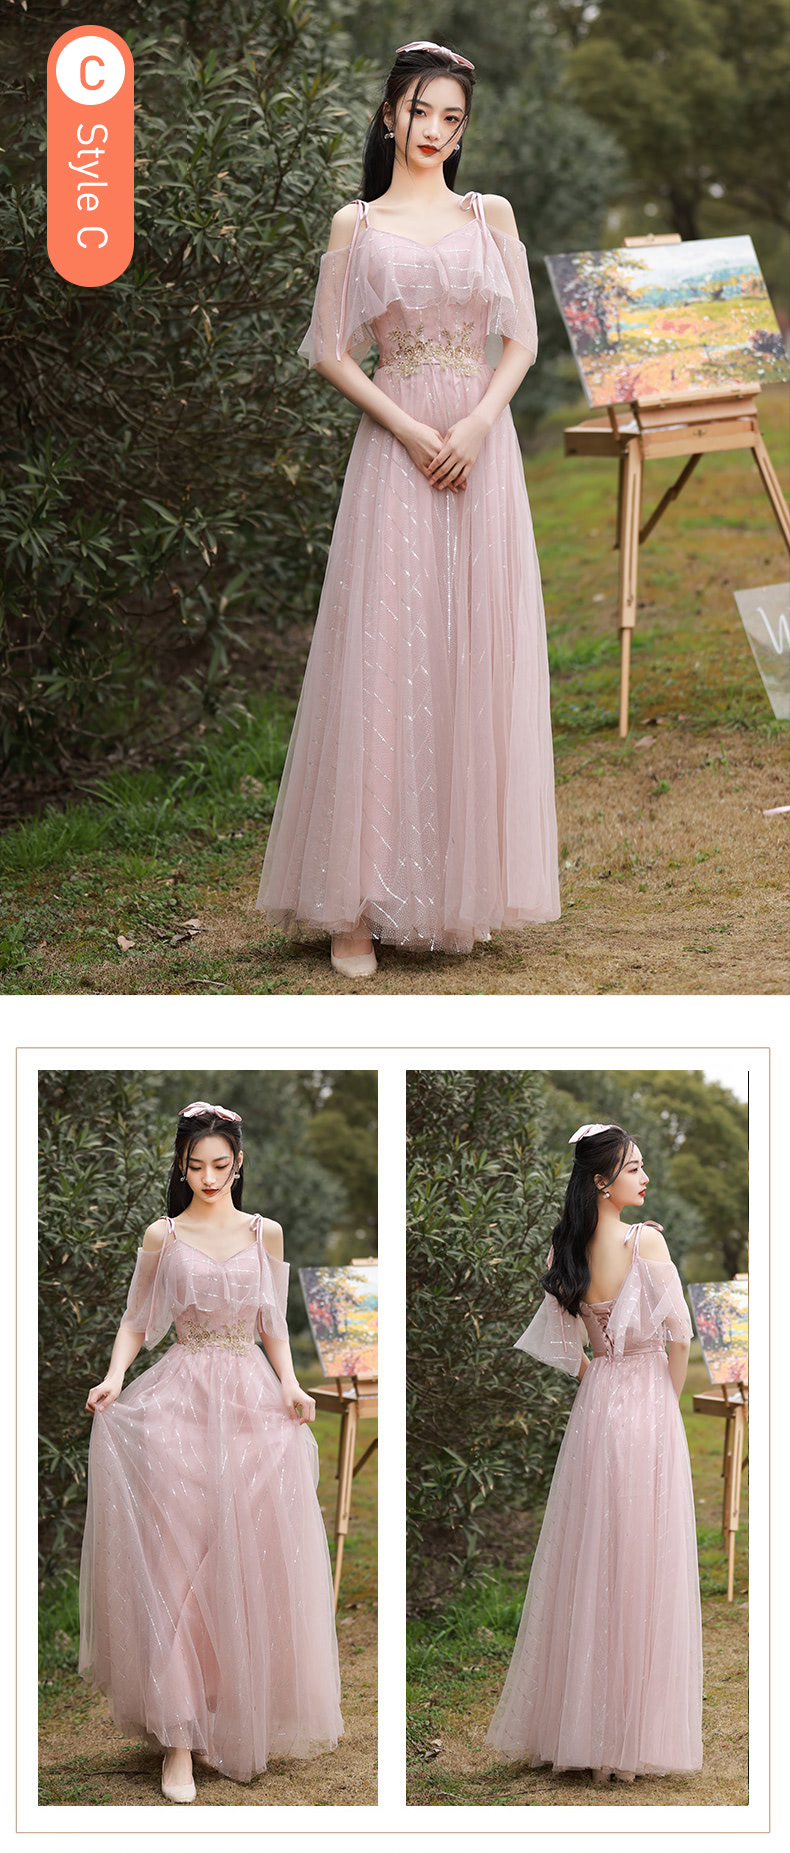 Fairy-Pink-Bridesmaid-Dress-with-Sleeves-Chiffon-Long-Casual-Gown22.jpg